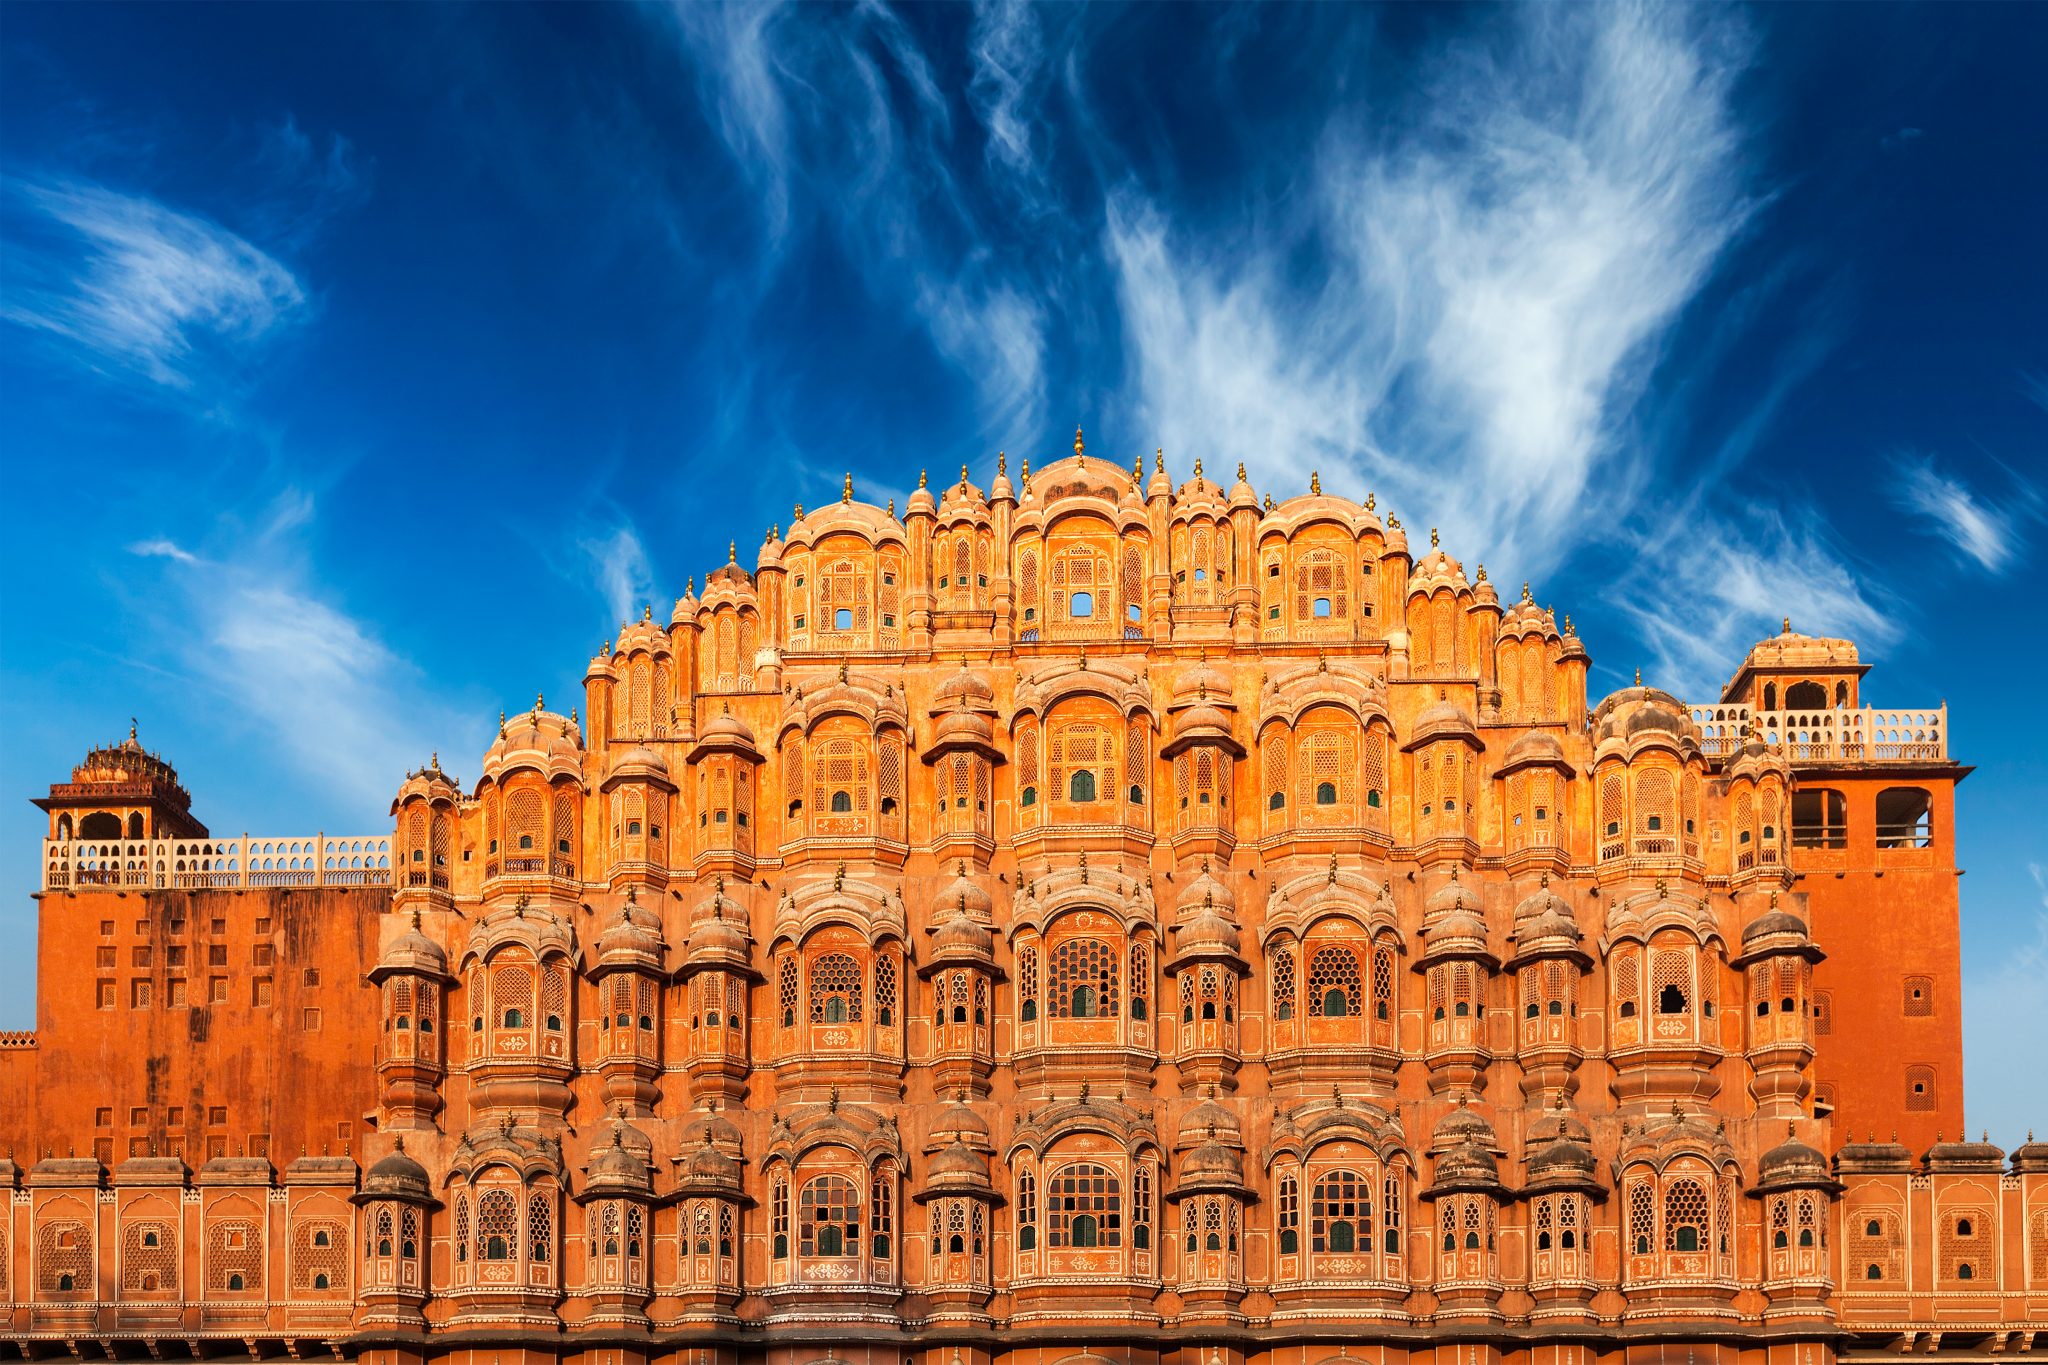 hawa-mahal-palace-of-the-winds-jaipur-rajasthan-H7PVW5Y-scaled